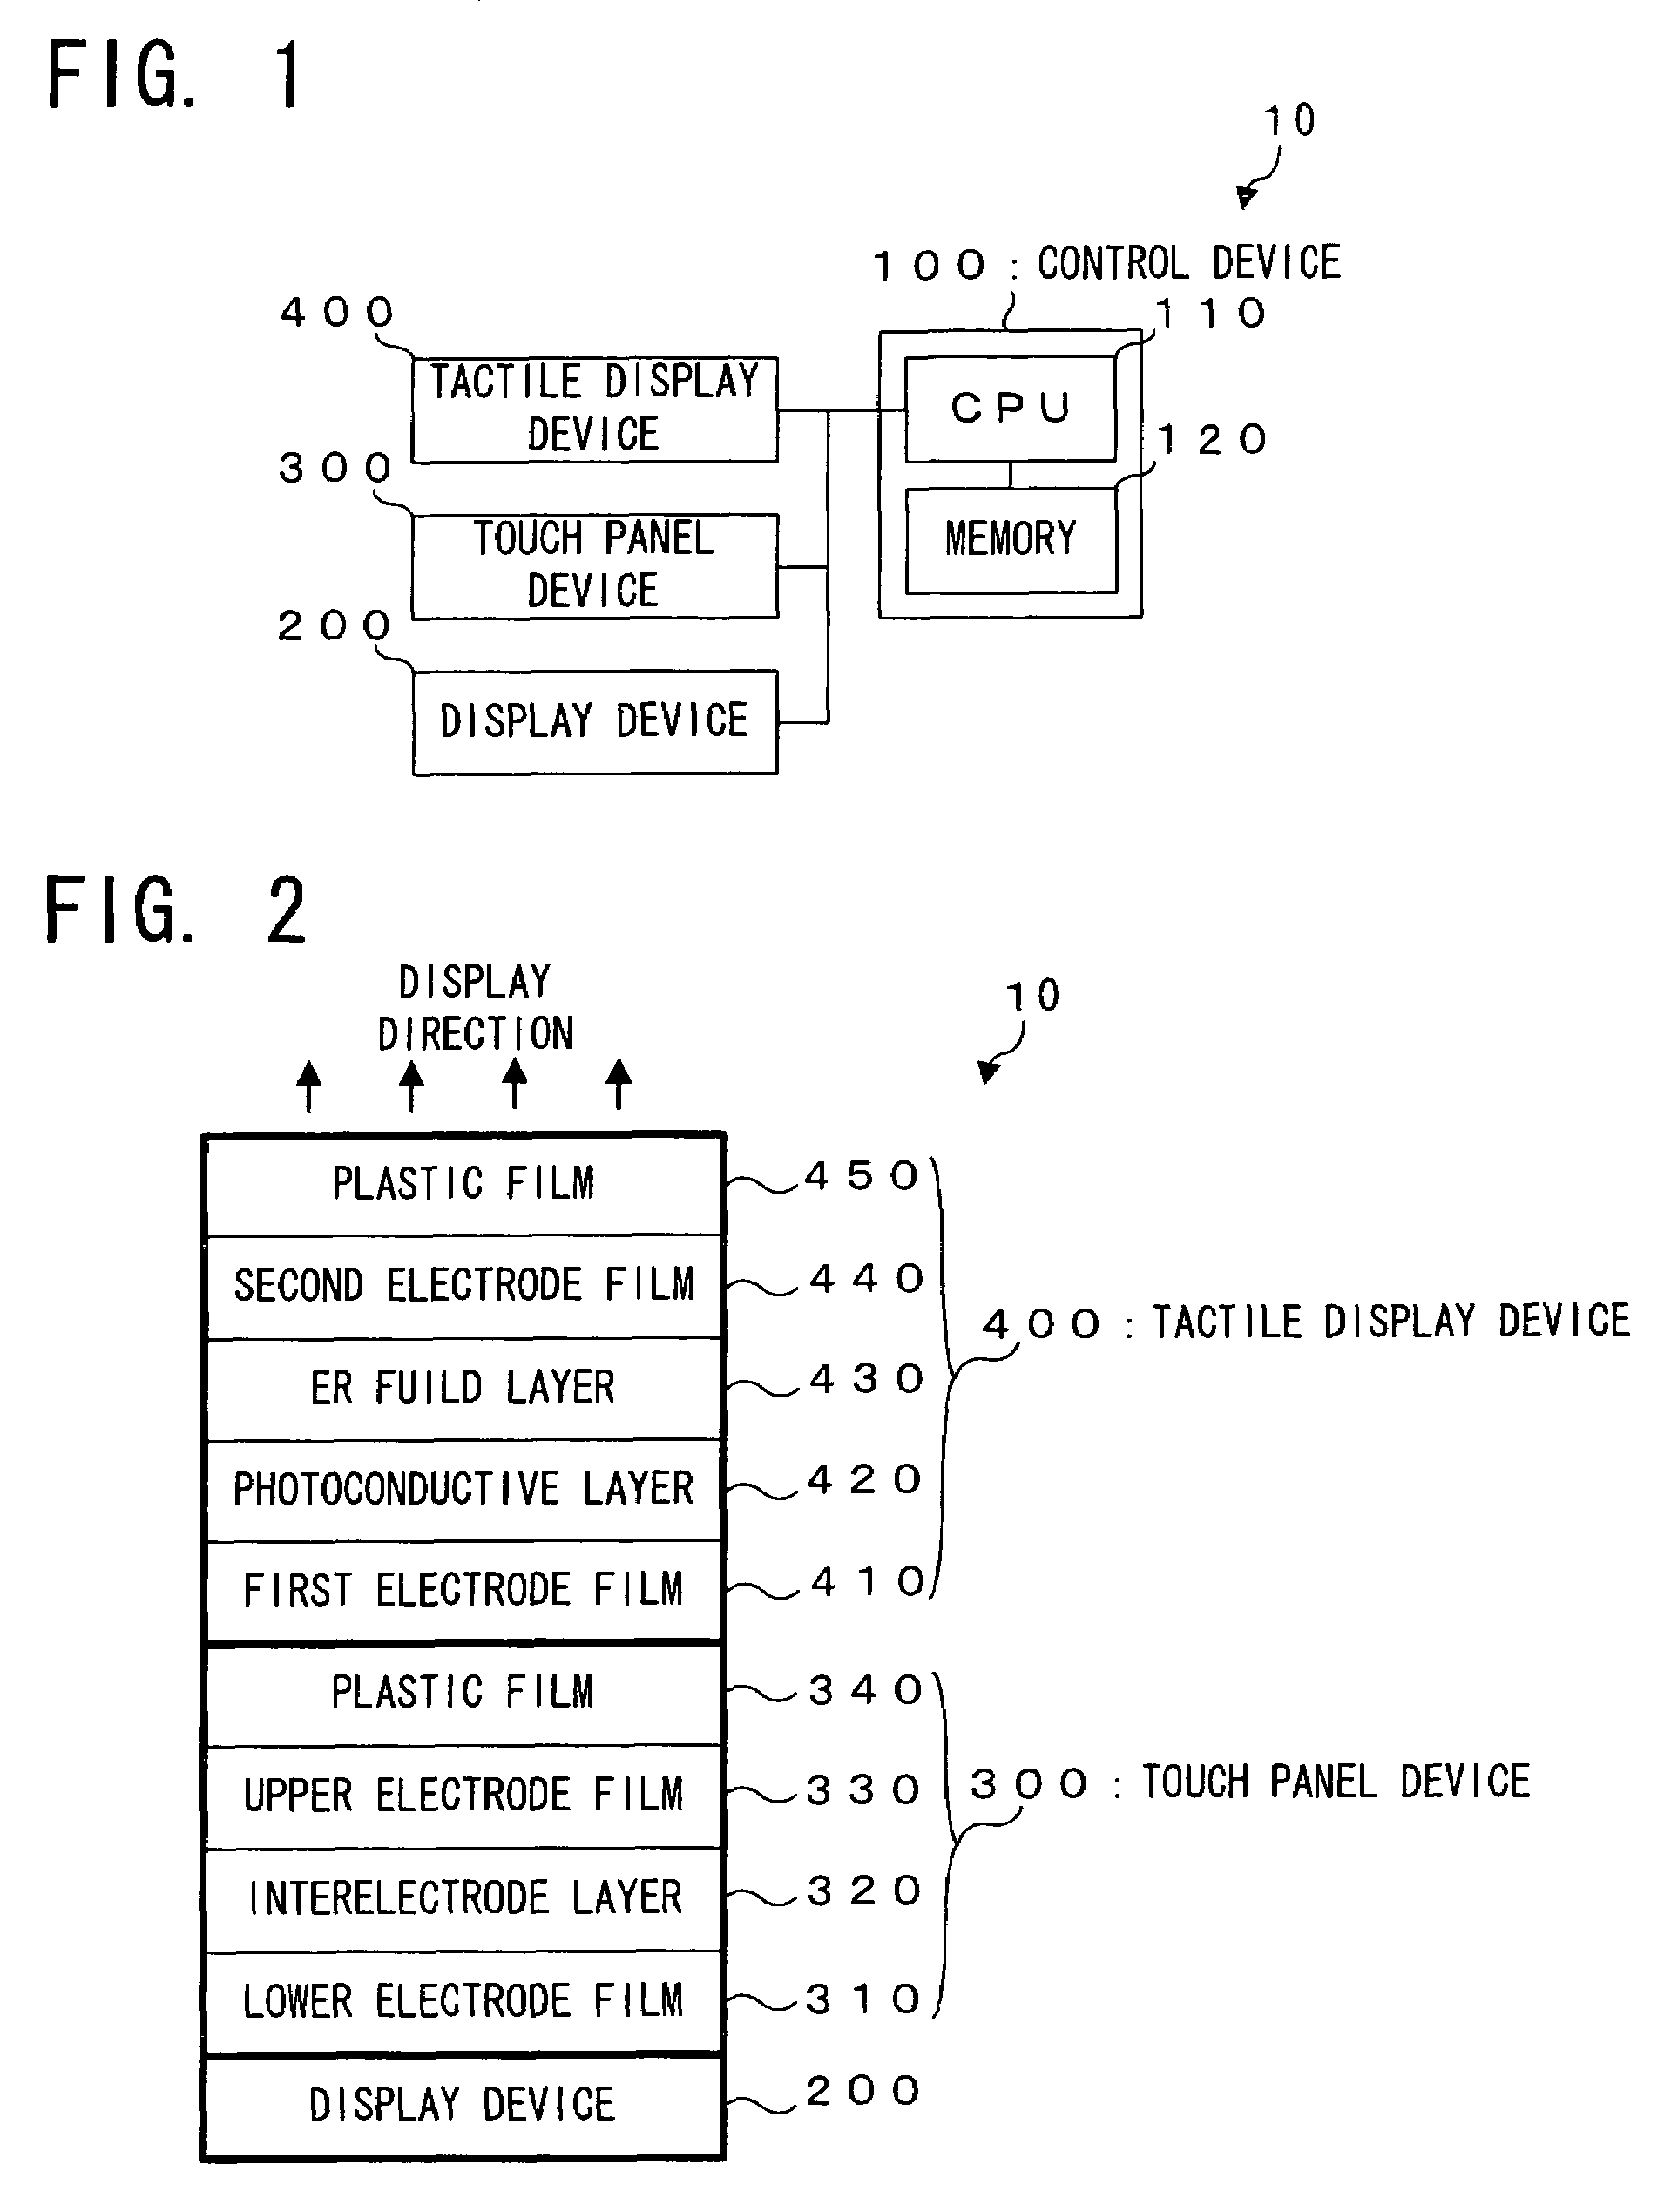 Tactile display device and touch panel apparatus with tactile display function using electrorheological fluid